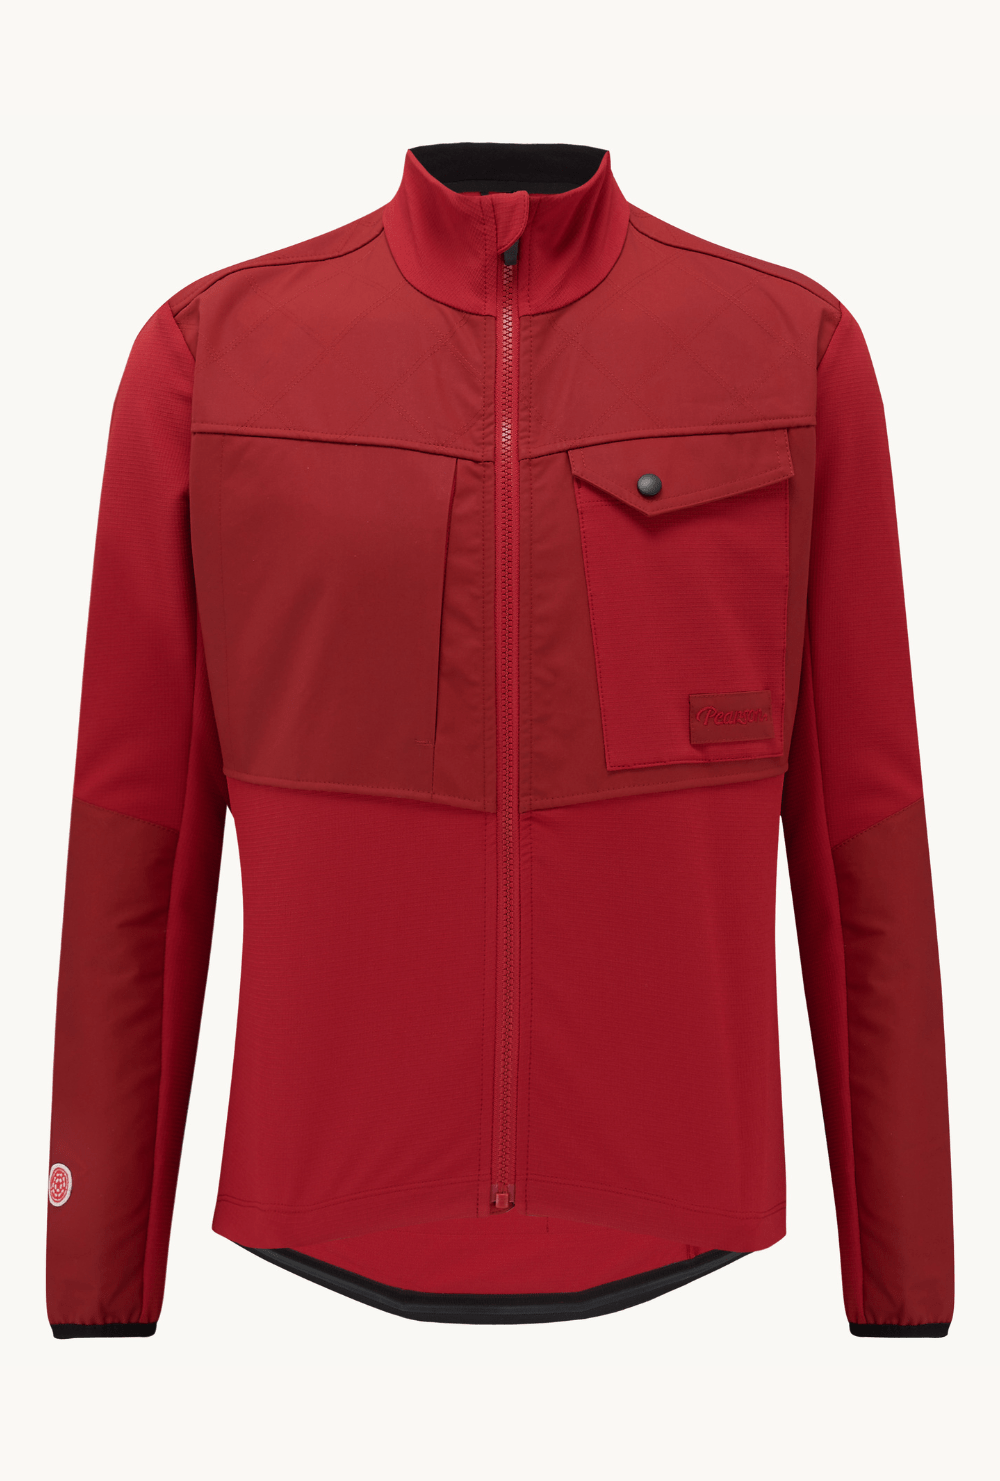 Pearson 1860  Because Its There - Red Adventure Long Sleeve Cycling Jacket  Cherry Red / X-large